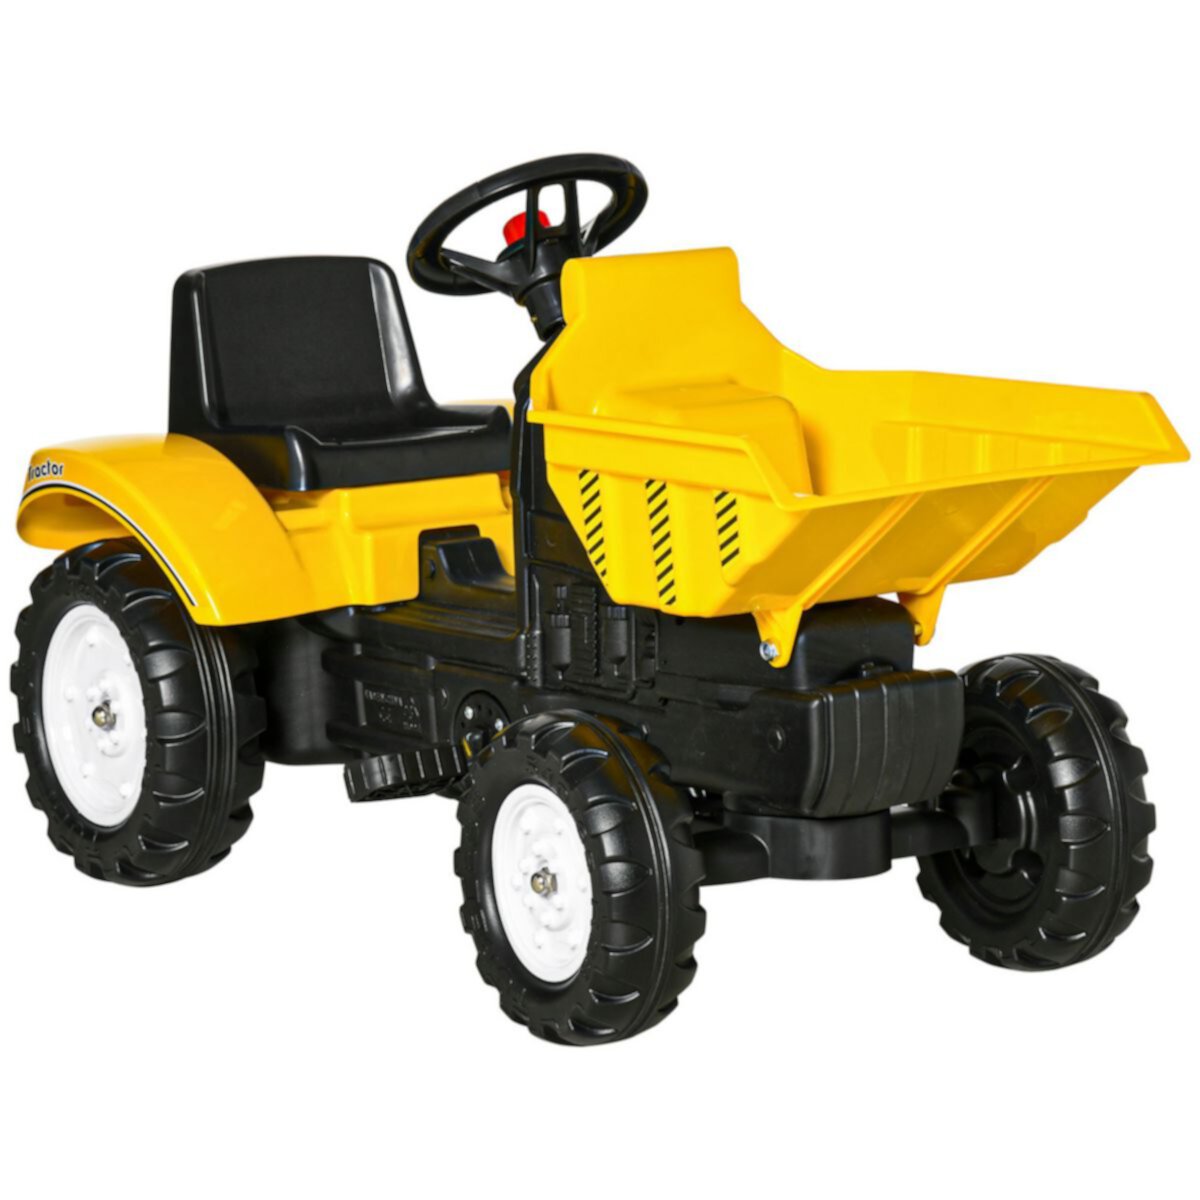 Toddler Tractor With Forward Backward Function, Construction Toys Gift For Kids Aosom